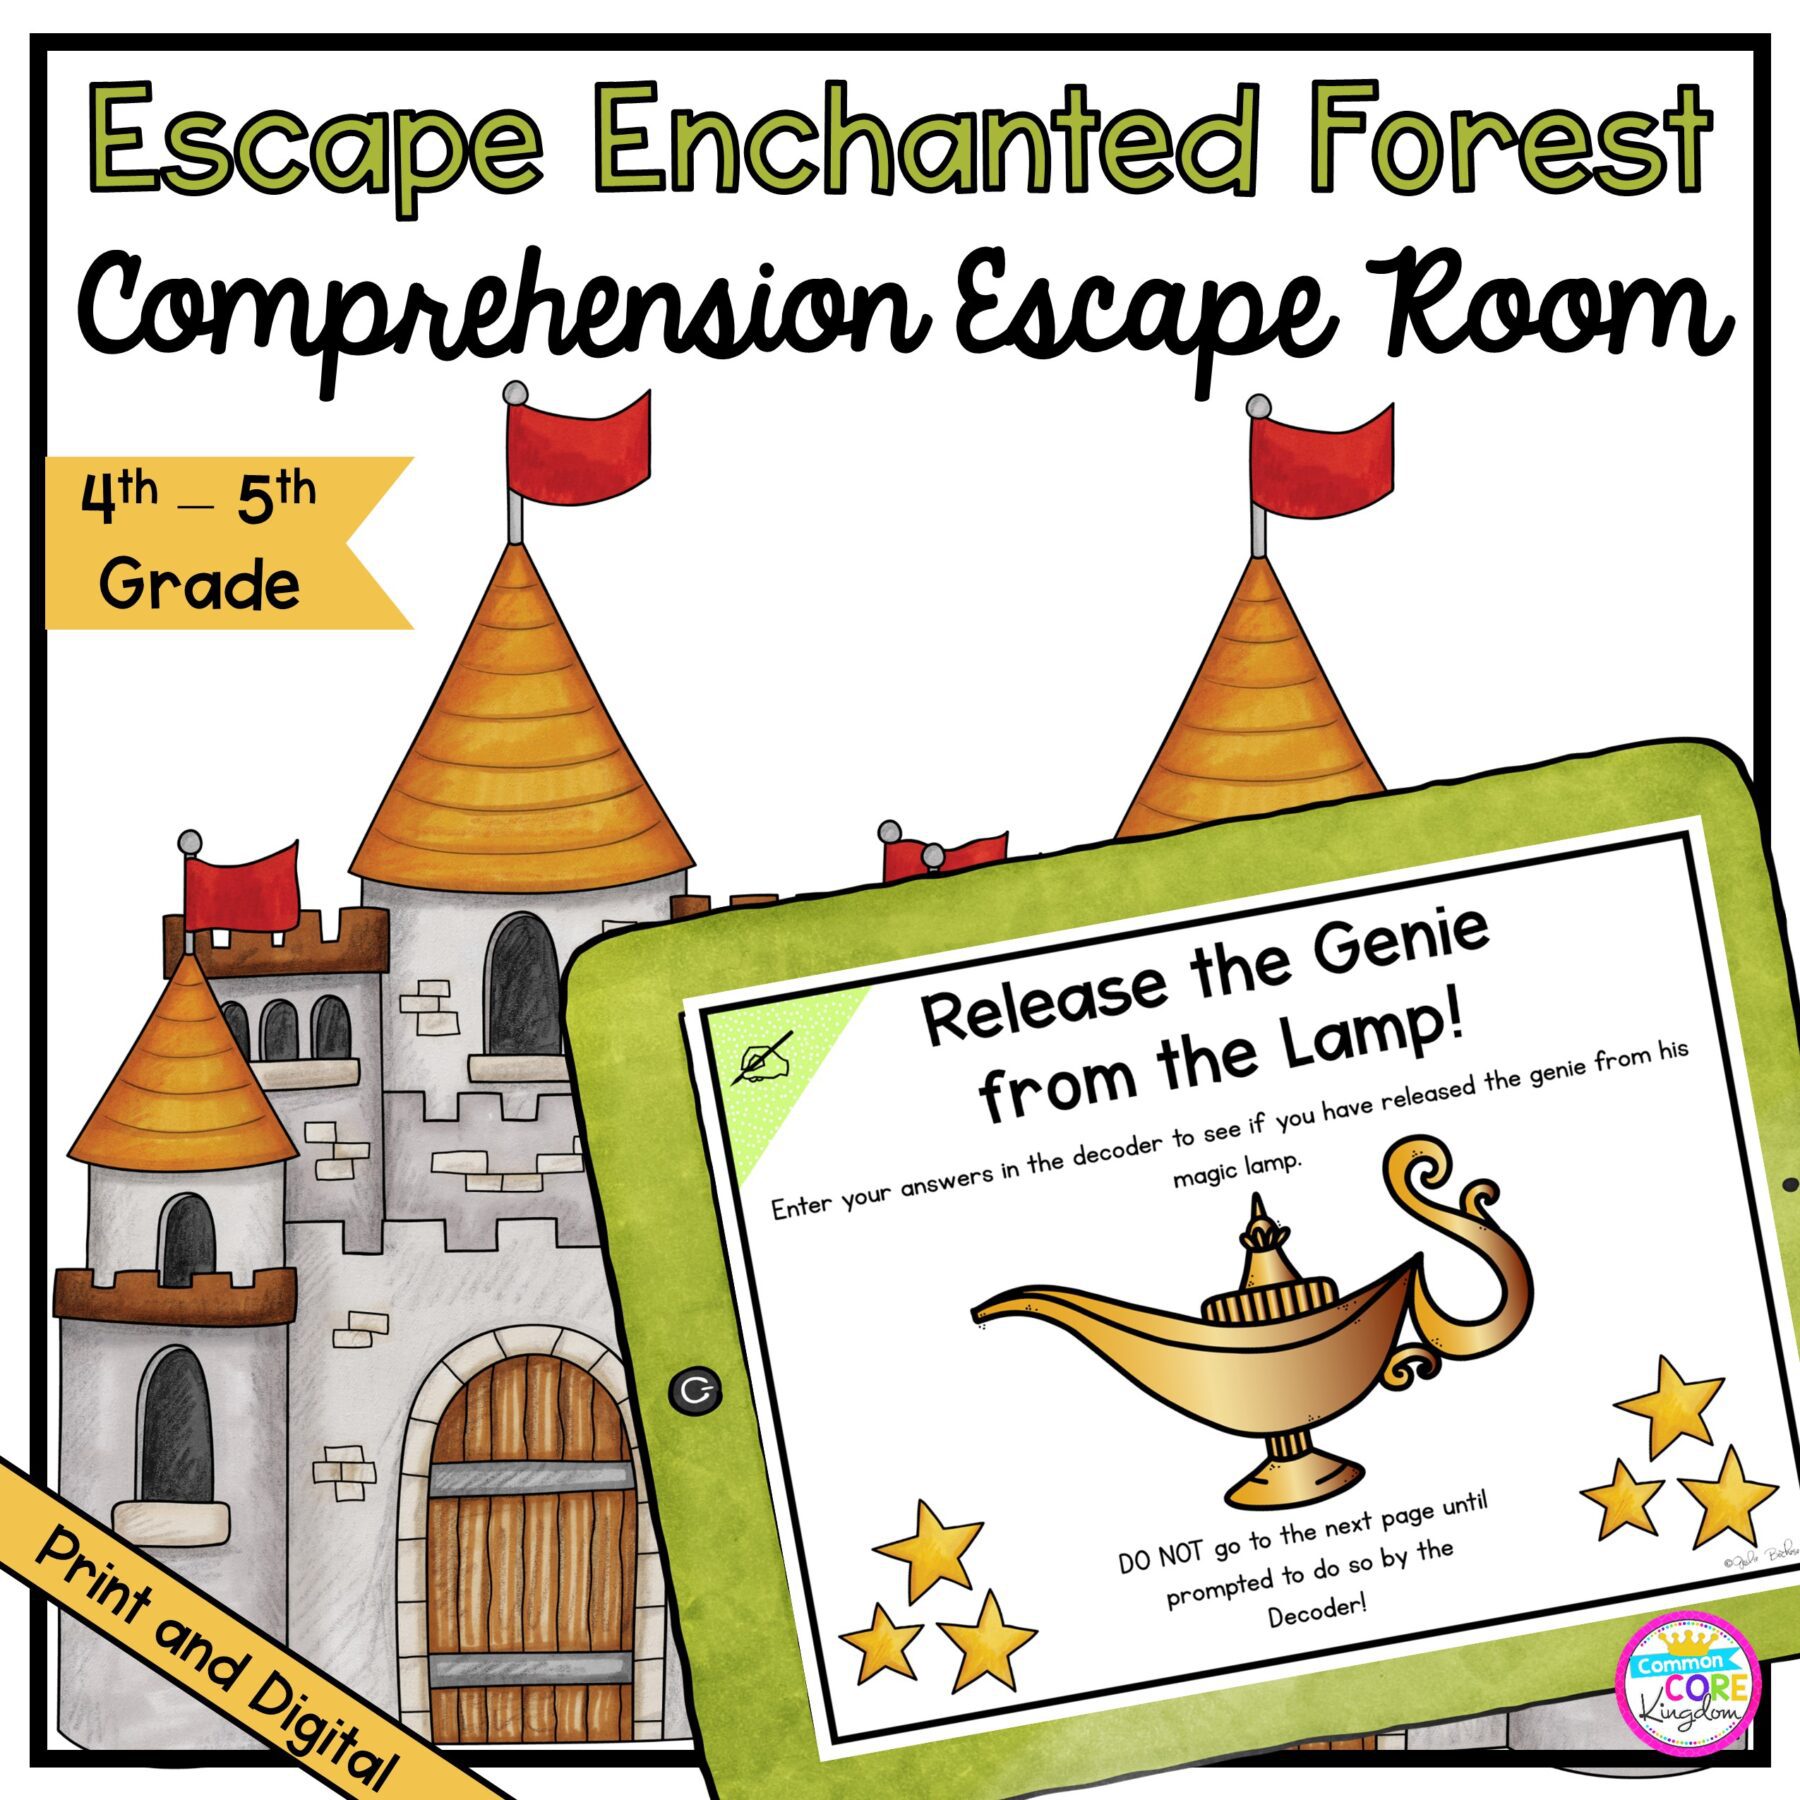 Comprehension Escape Room: Escape the Enchanted Forest for 4th & 5th Grade in Google Slides Format